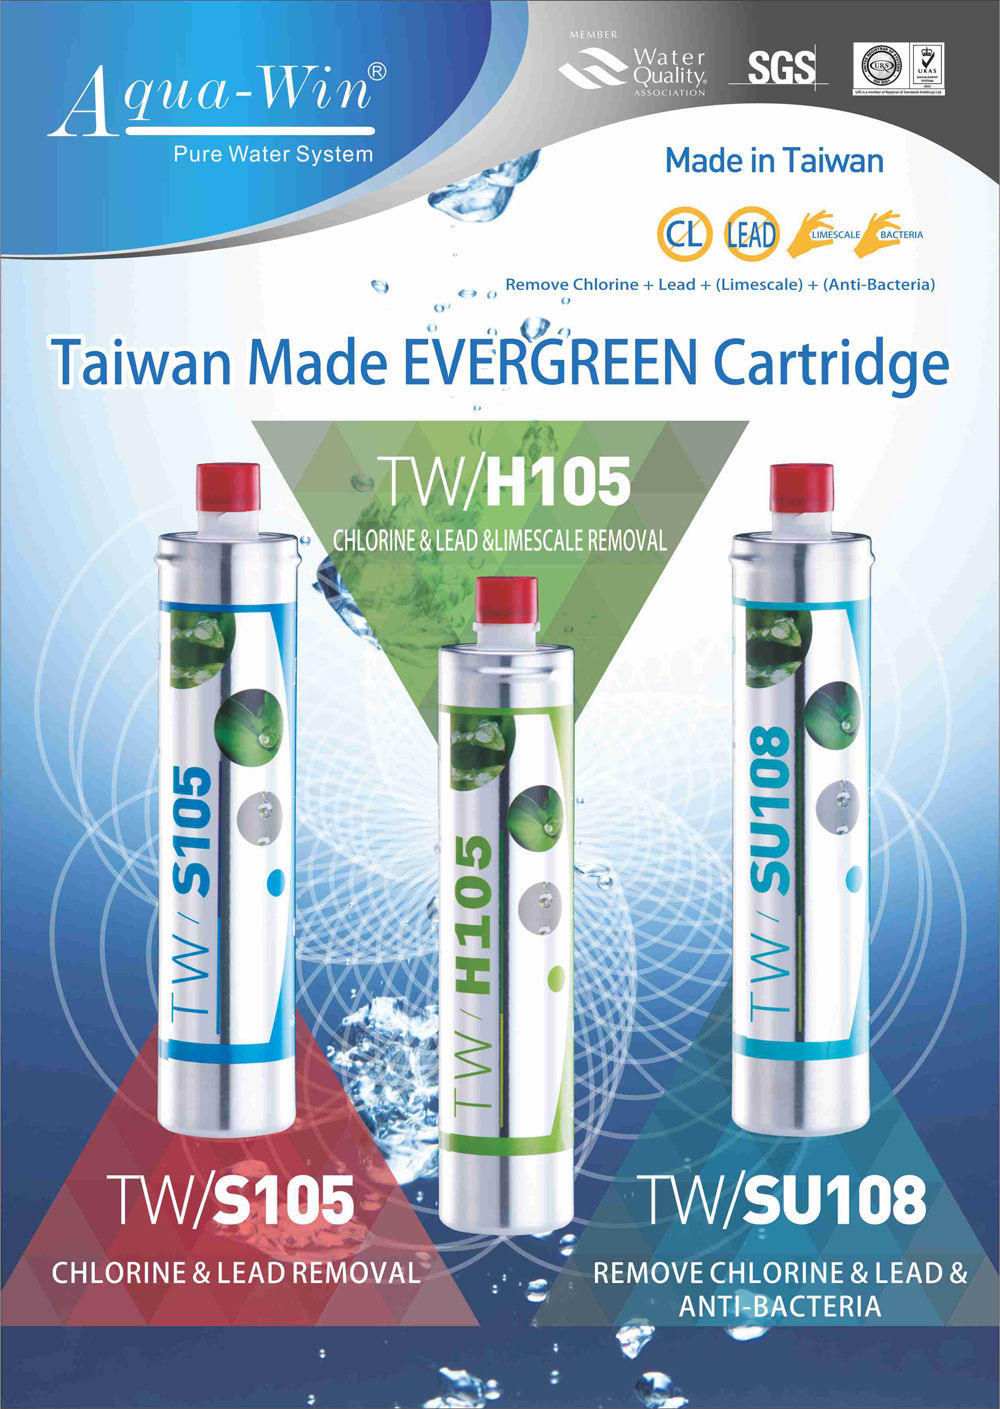 Taiwan single stage water filter